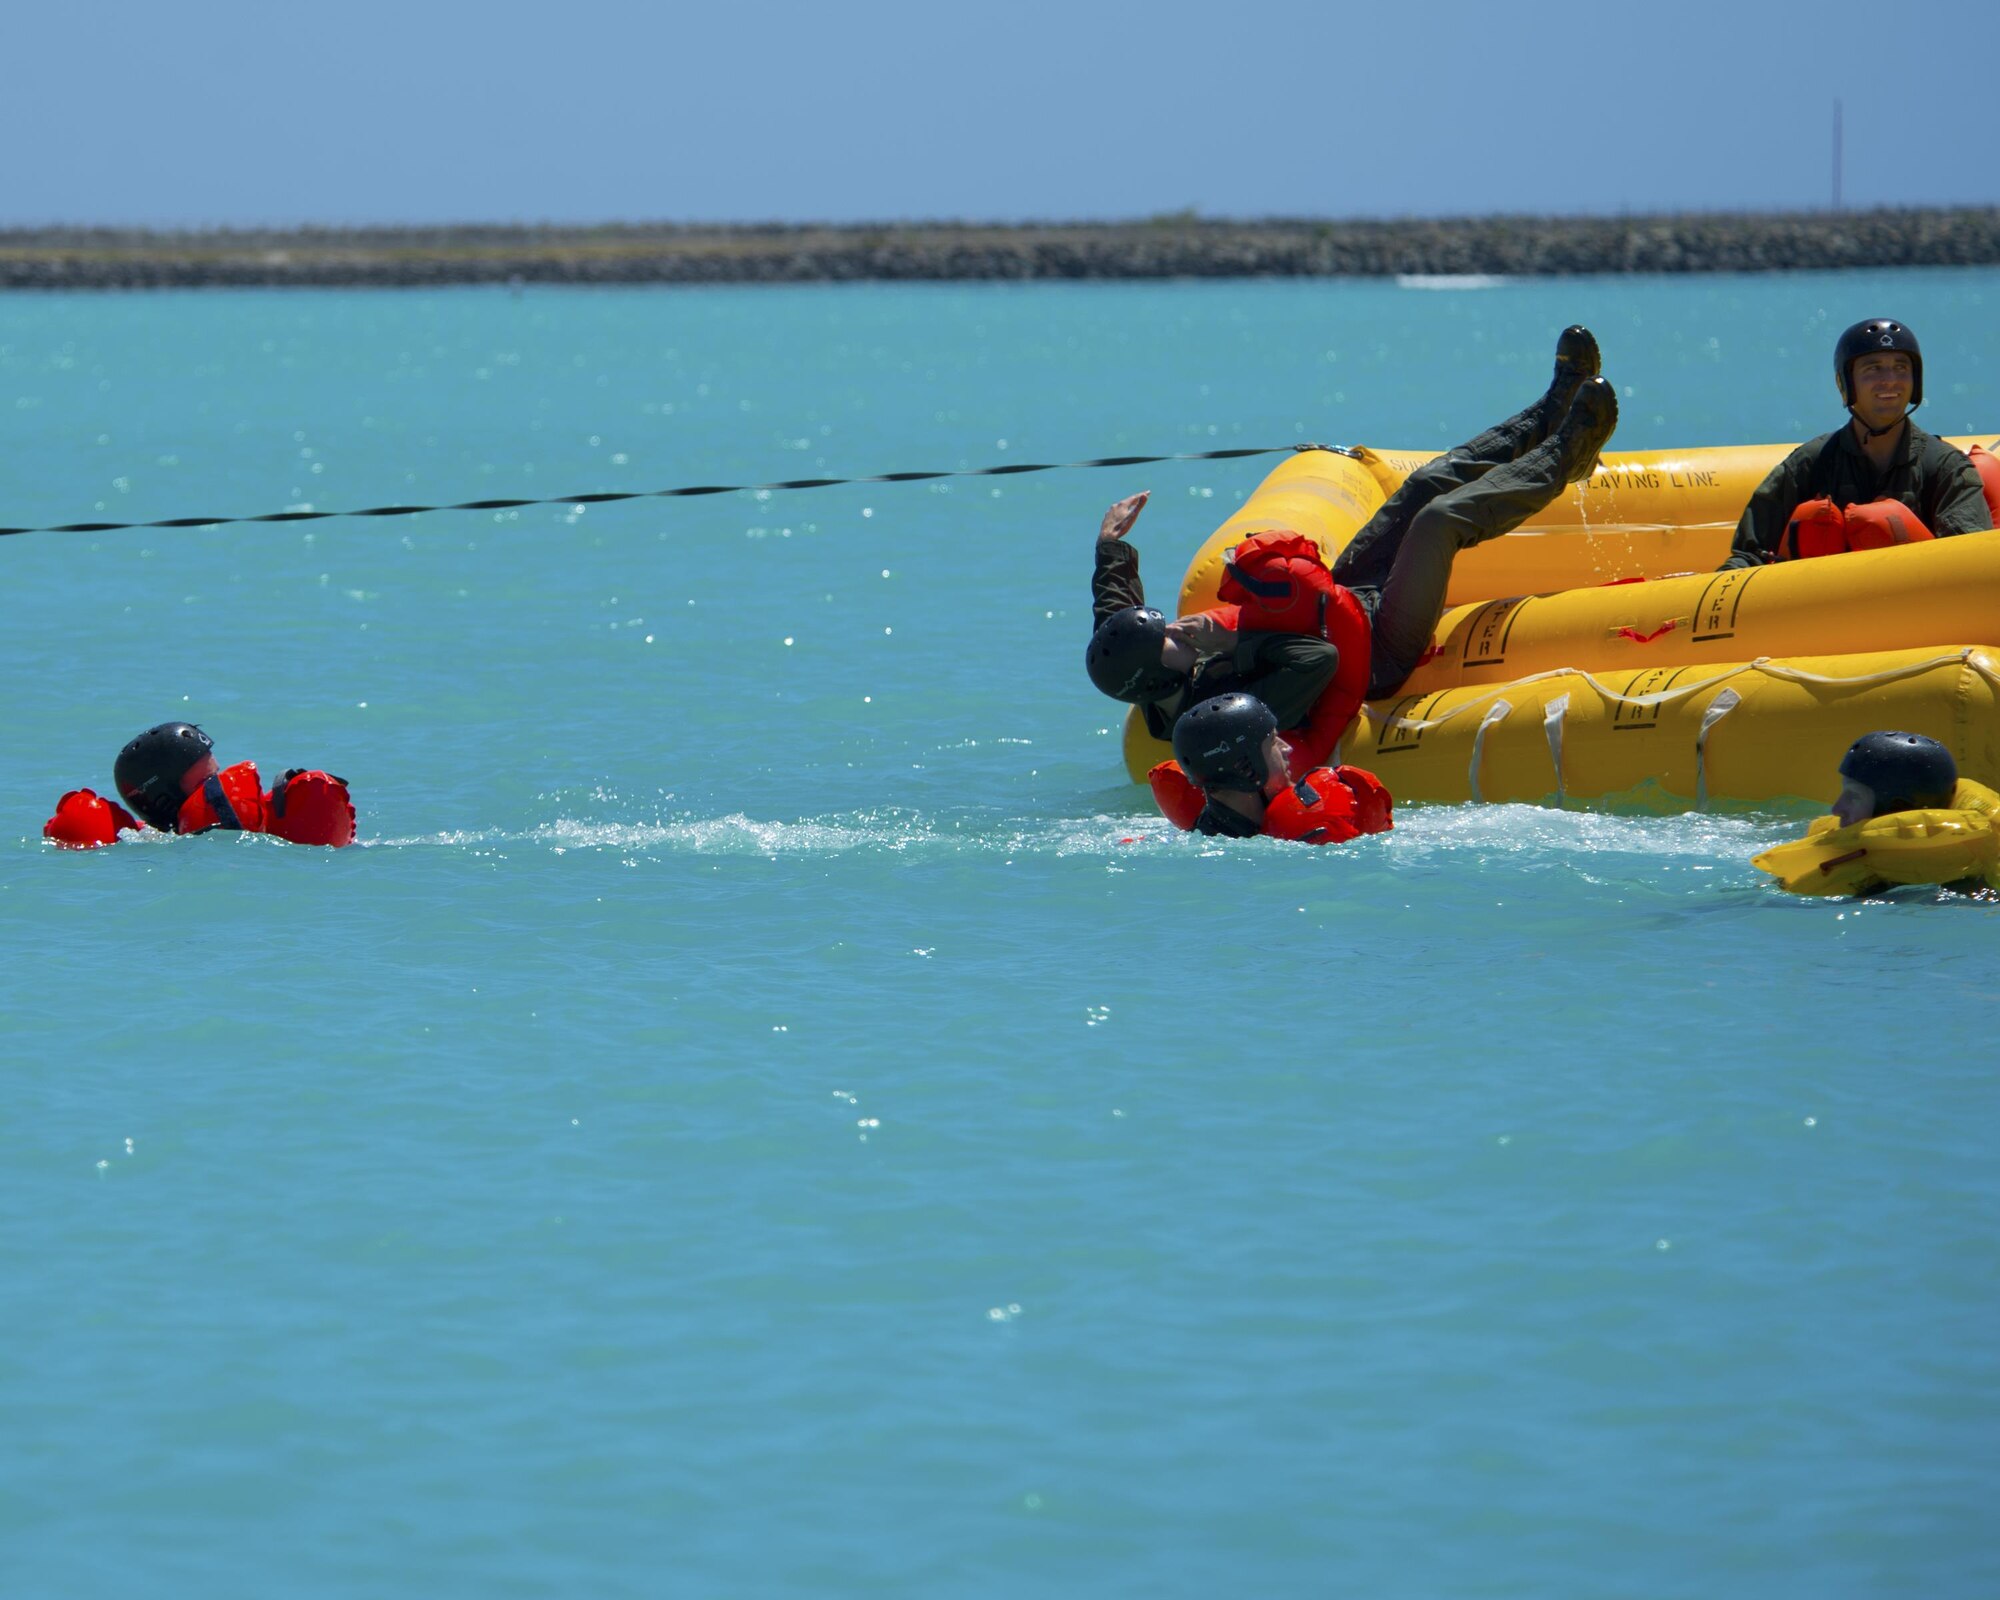 Airmen jump into Hickam Harbor to simulate exiting an aircraft that has landed in the ocean during water survival training March 23, 2015, at Joint Base Pearl Harbor-Hickam, Hawaii. Water survival training is completed on triennial basis for all aircrew assigned to the 15th Wing. The Airmen participating in the training were from the 535th Airlift Squadron, 65th Airlift Squadron and the 96th Air Refueling Squadron. (U.S. Air Force photo/Tech. Sgt. Aaron Oelrich)